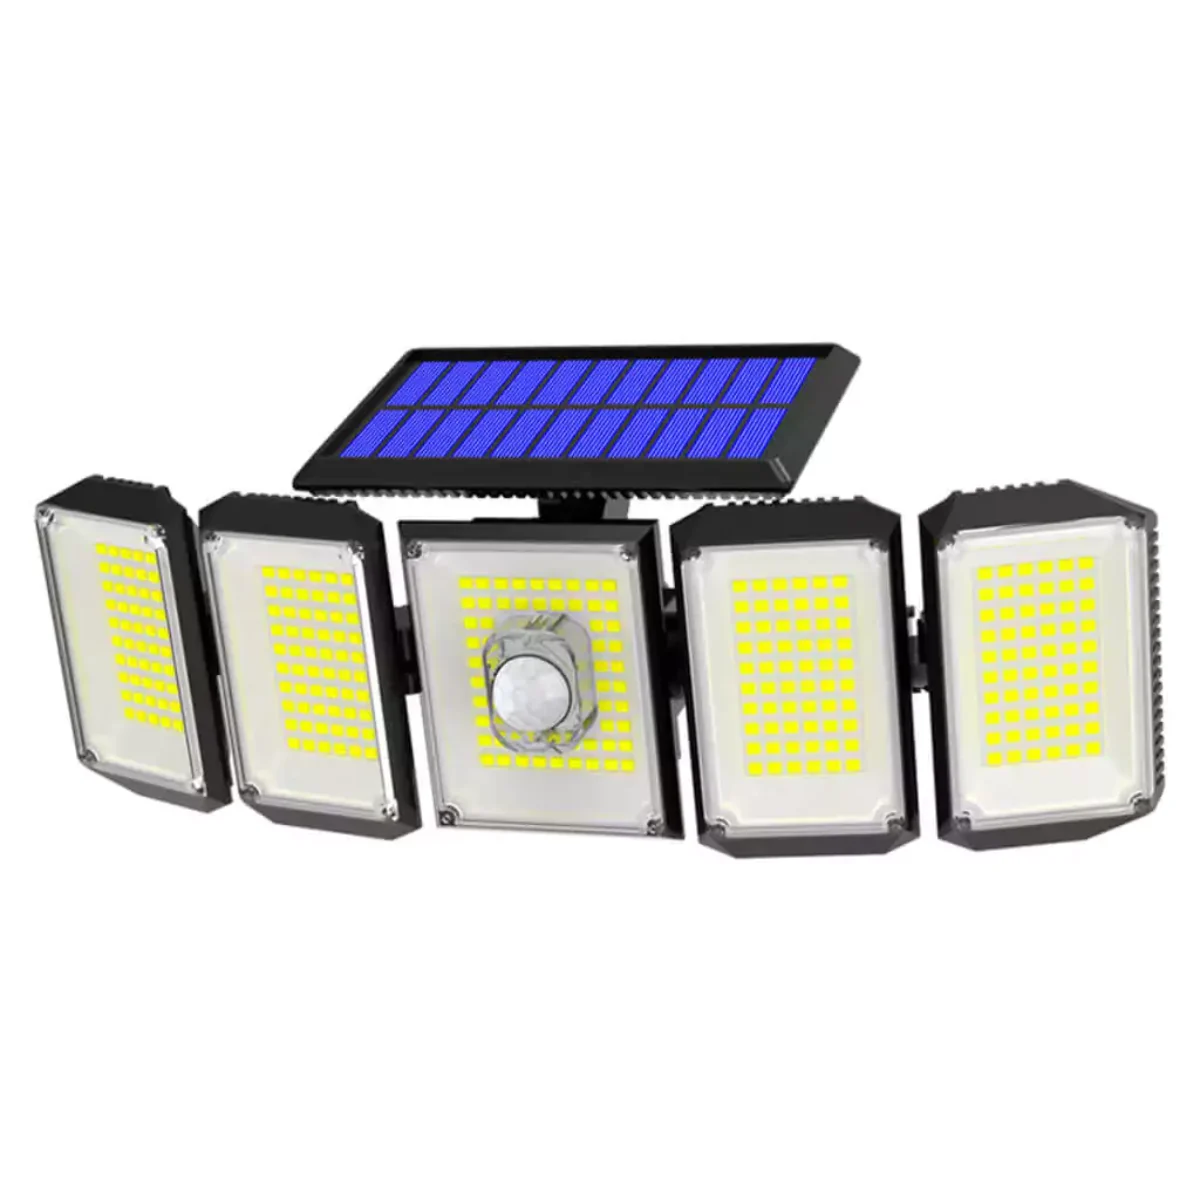 Buy solar lights for home outdoor at best price in India